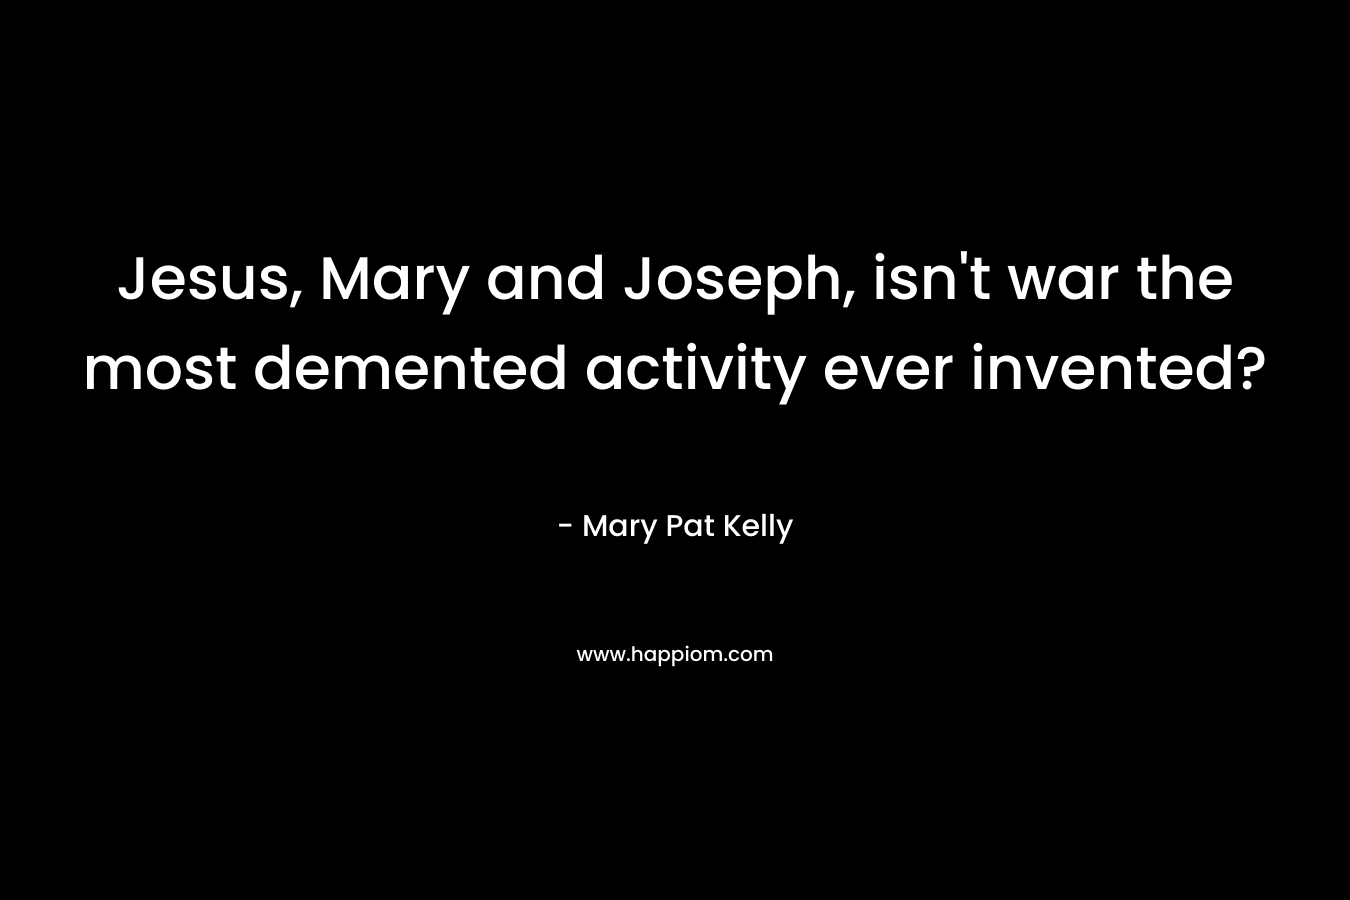 Jesus, Mary and Joseph, isn’t war the most demented activity ever invented? – Mary Pat Kelly